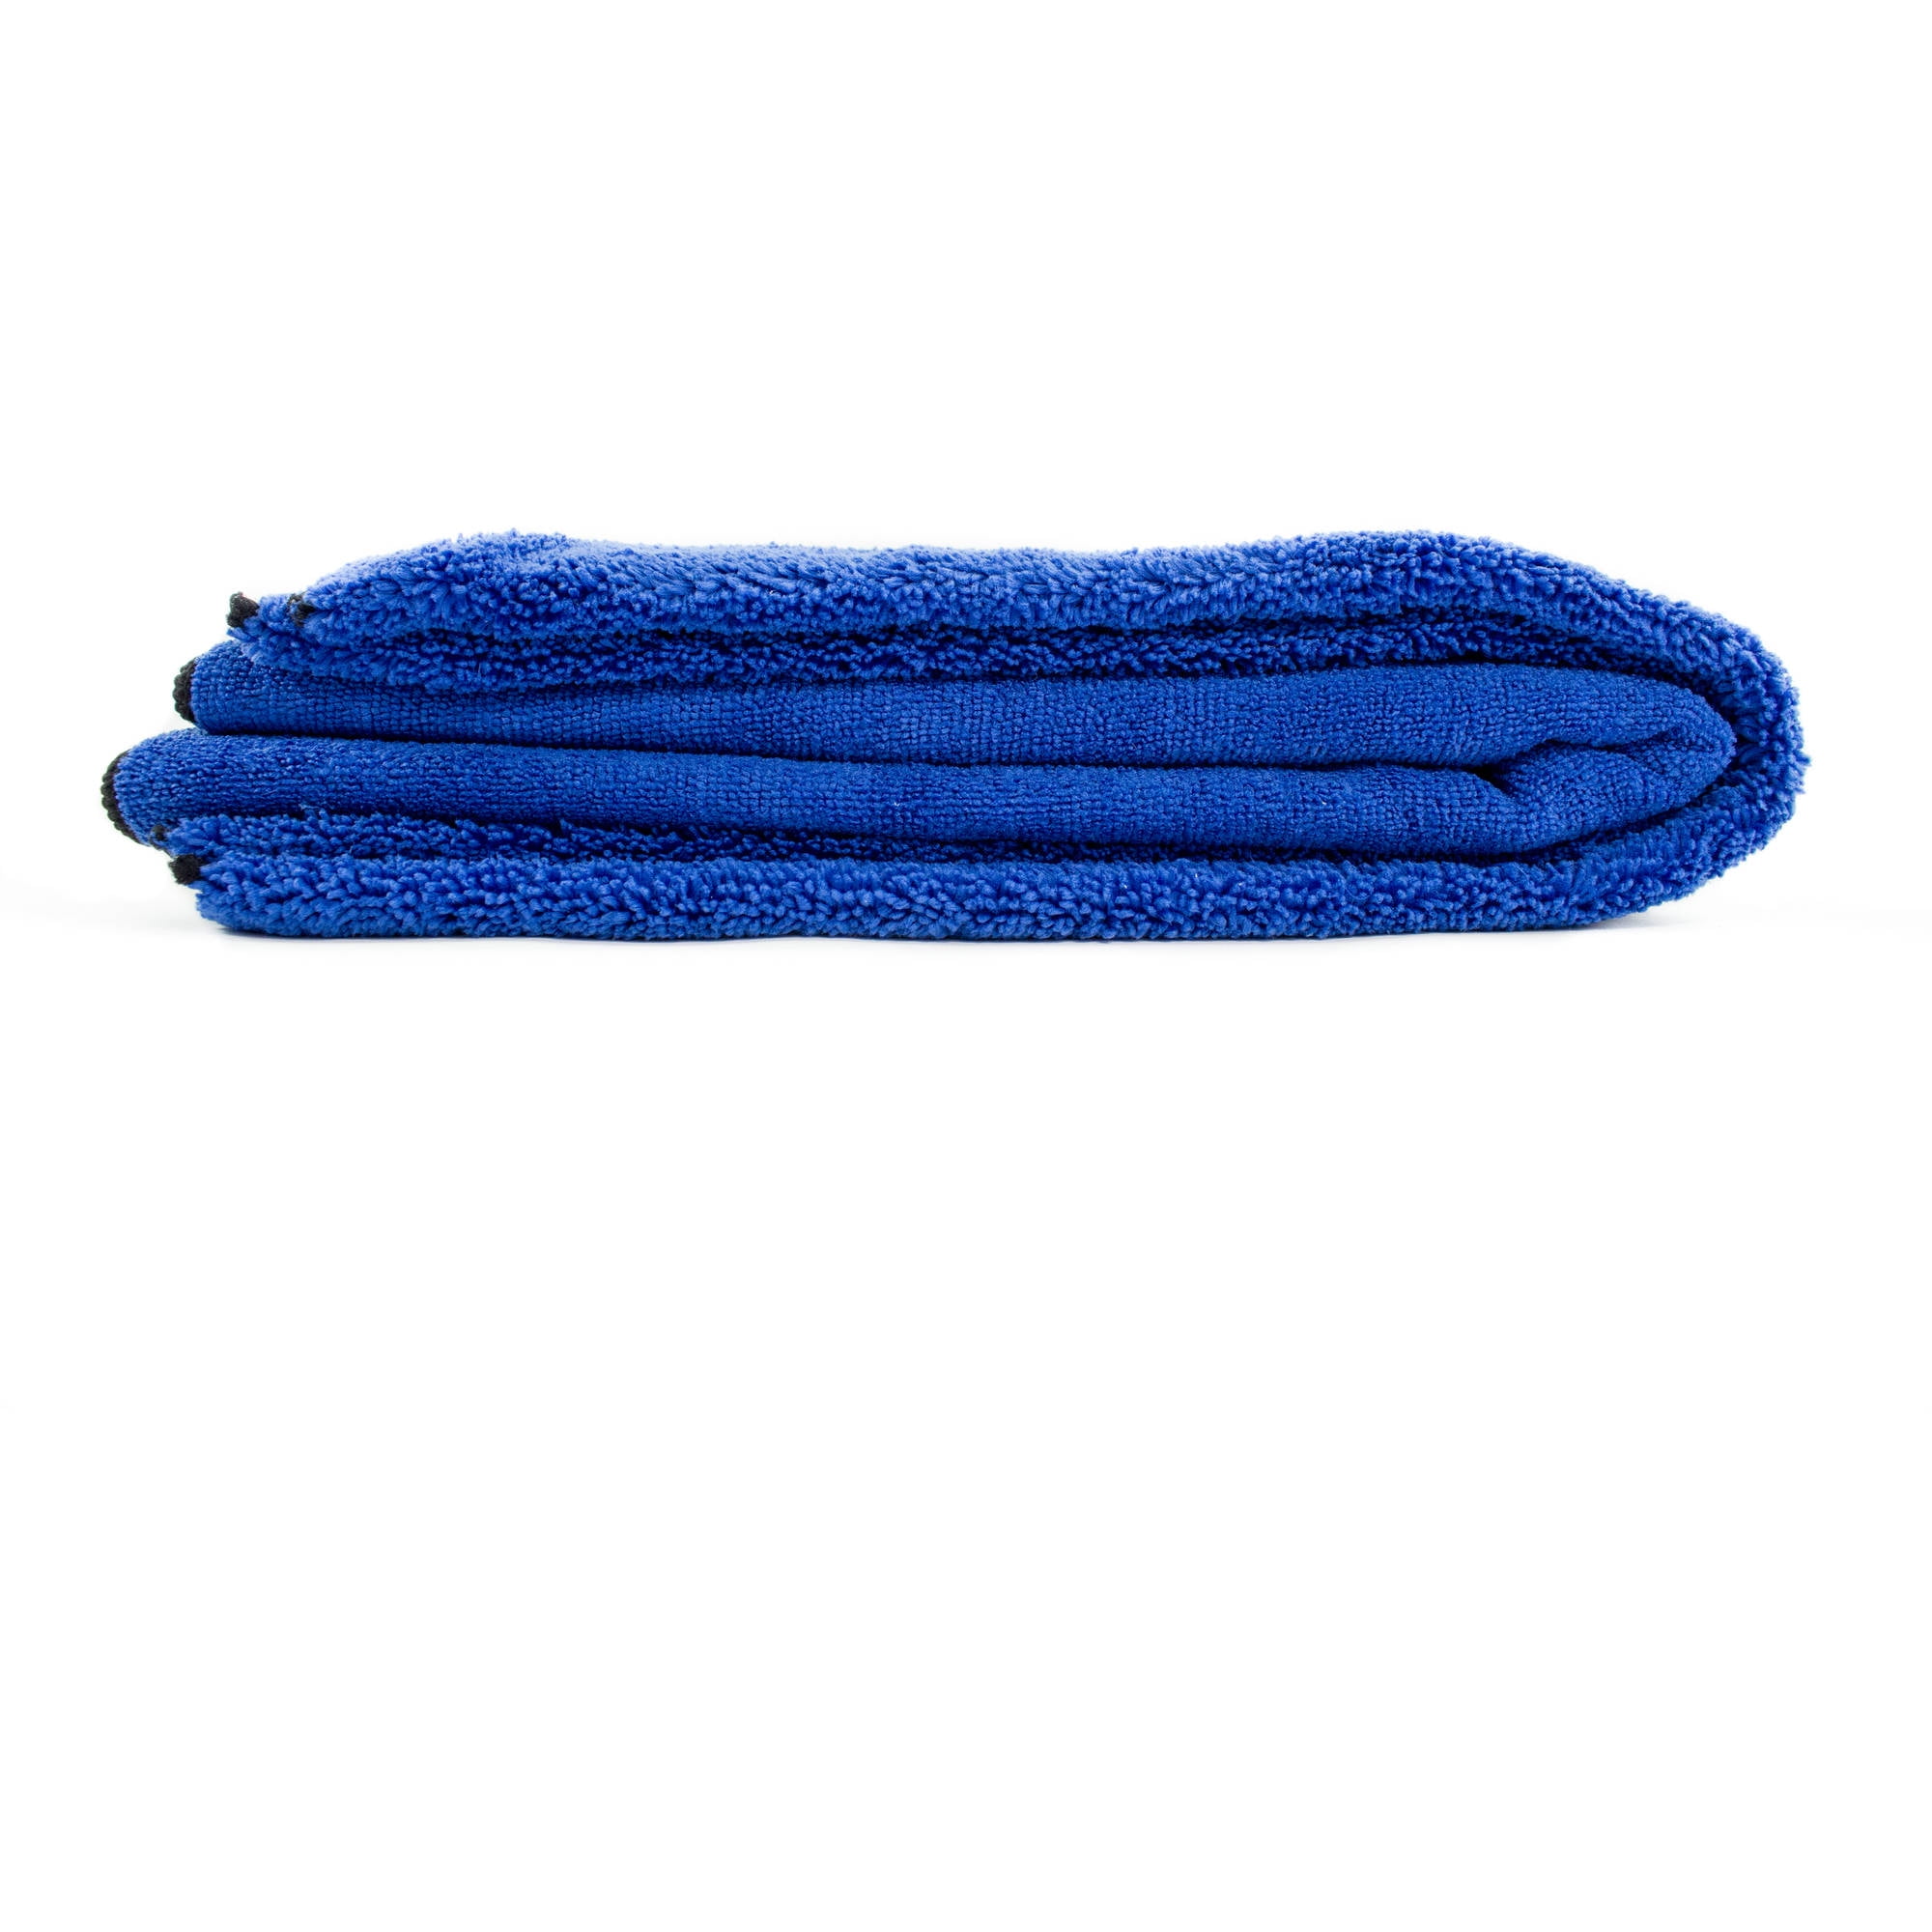 Pocketed Plush Lint-Free Cloth Zwipes Auto 669 Large Premium Absorbent Microfiber Drying Towel Blue 